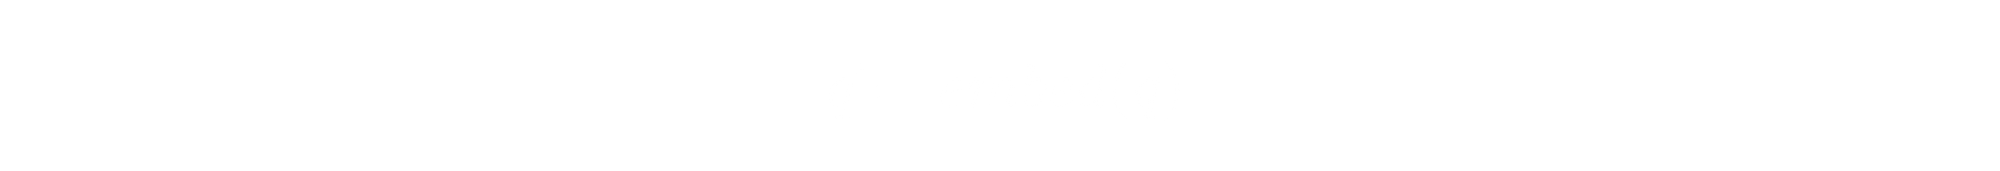 Black background with centered white text related to embedding in programming code, presented in a simple and clean layout